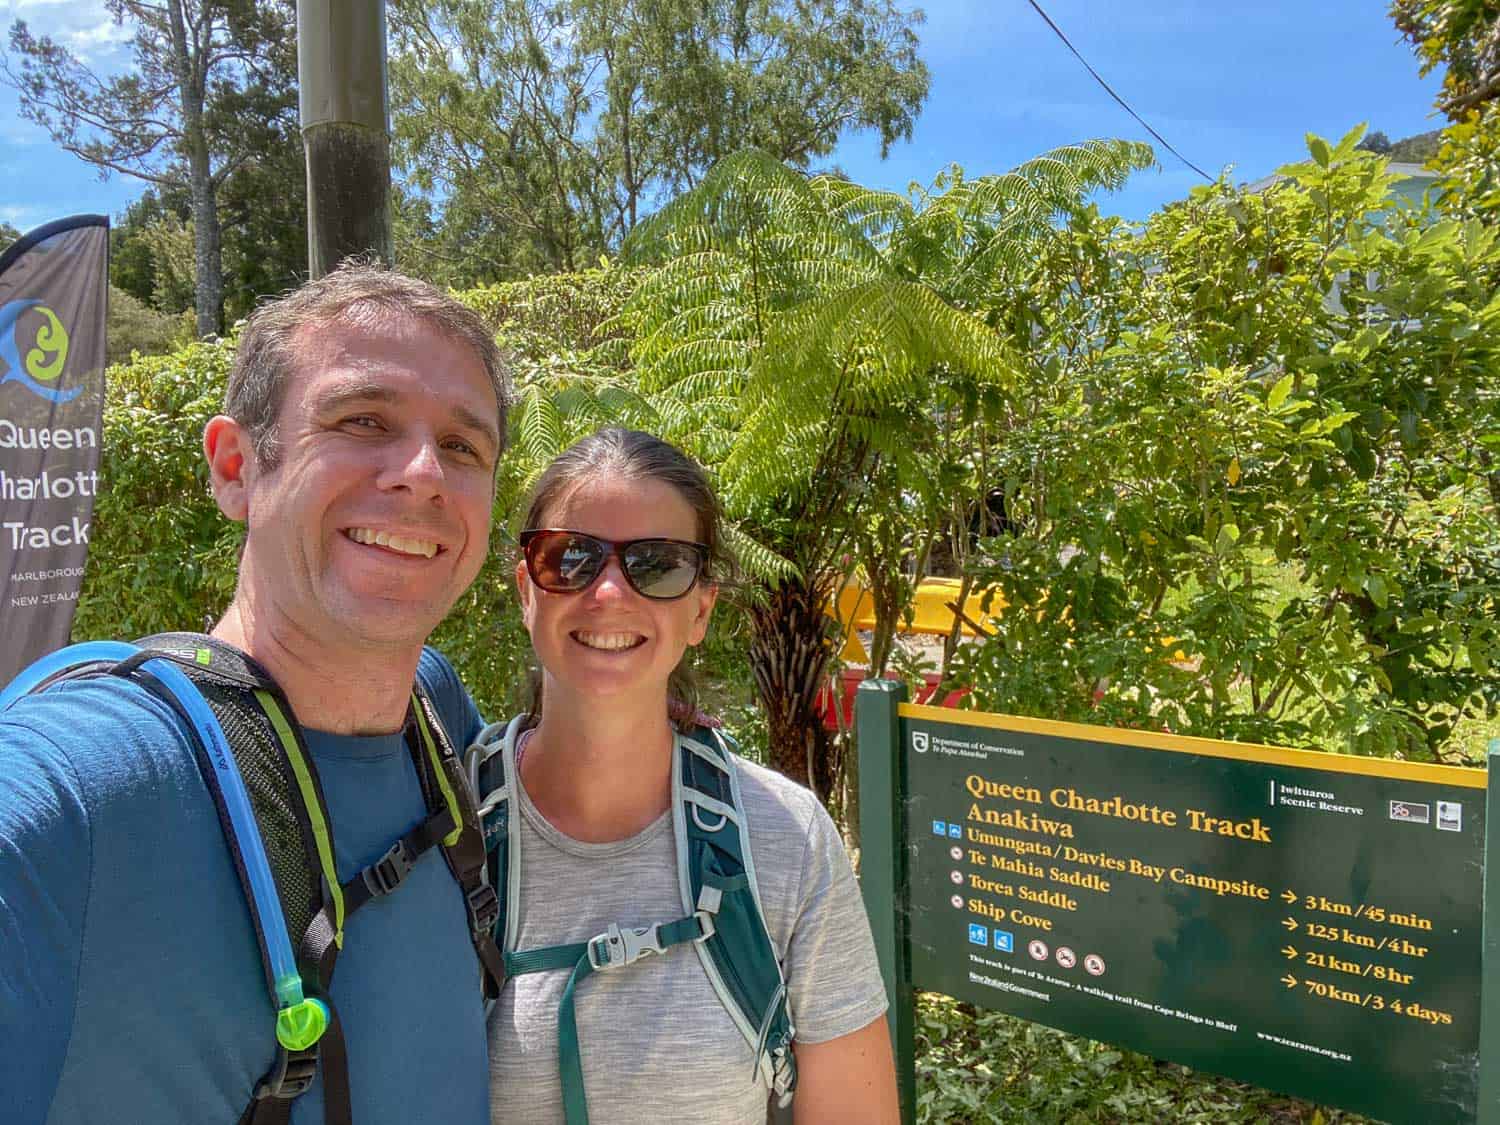 Simon and Erin at the end of the Queen Charlotte Track in Anakiwa 